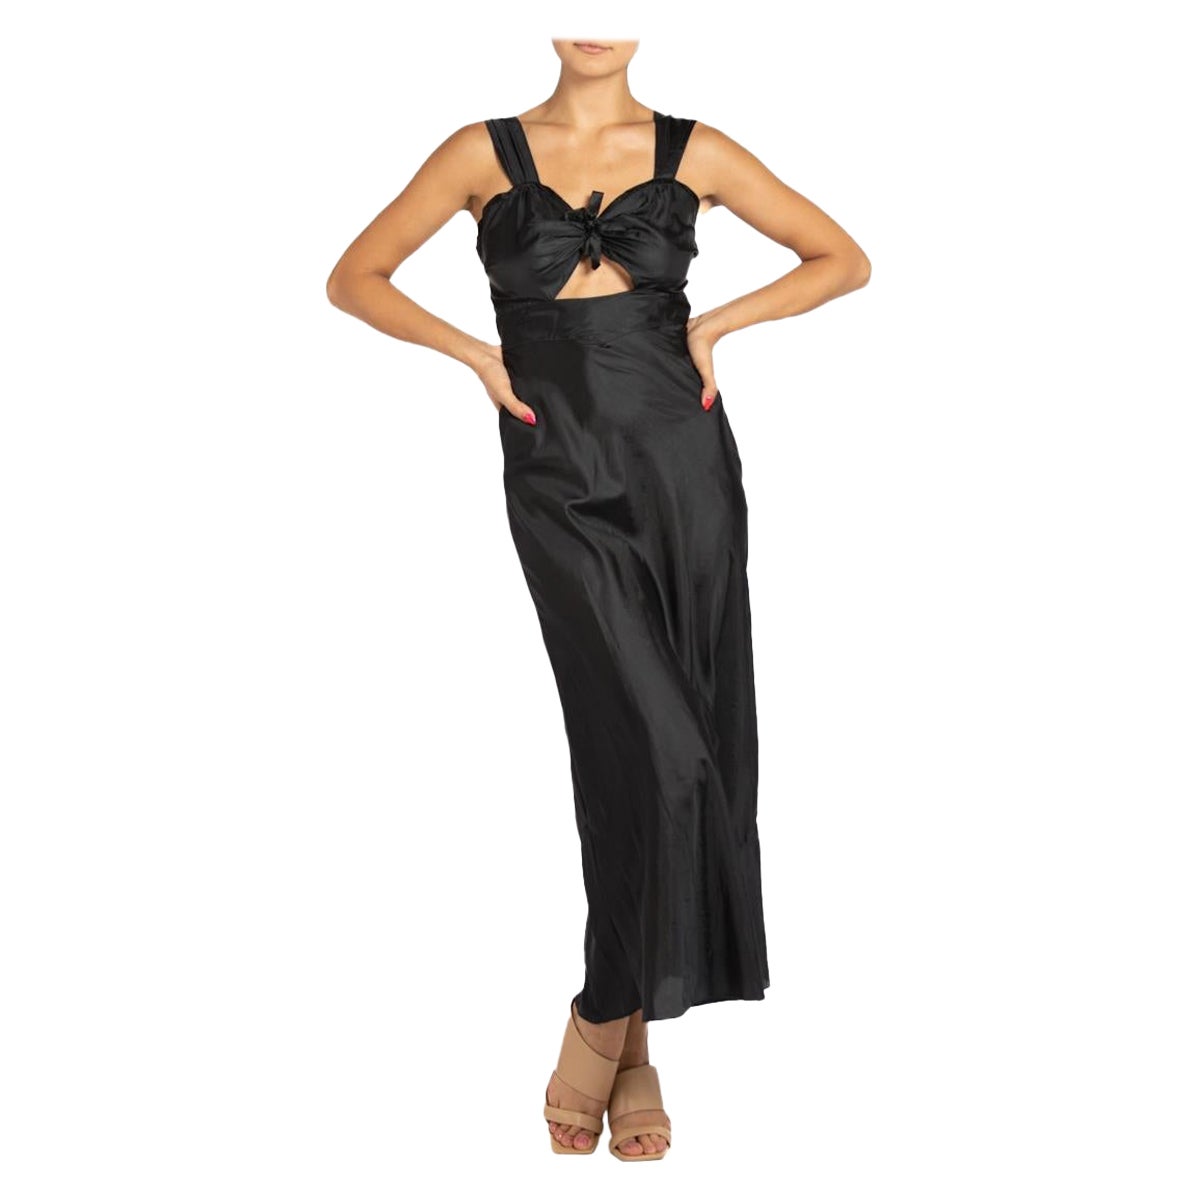 1940S Black Bias Cut Nylon With Peek A Boo Negligee For Sale